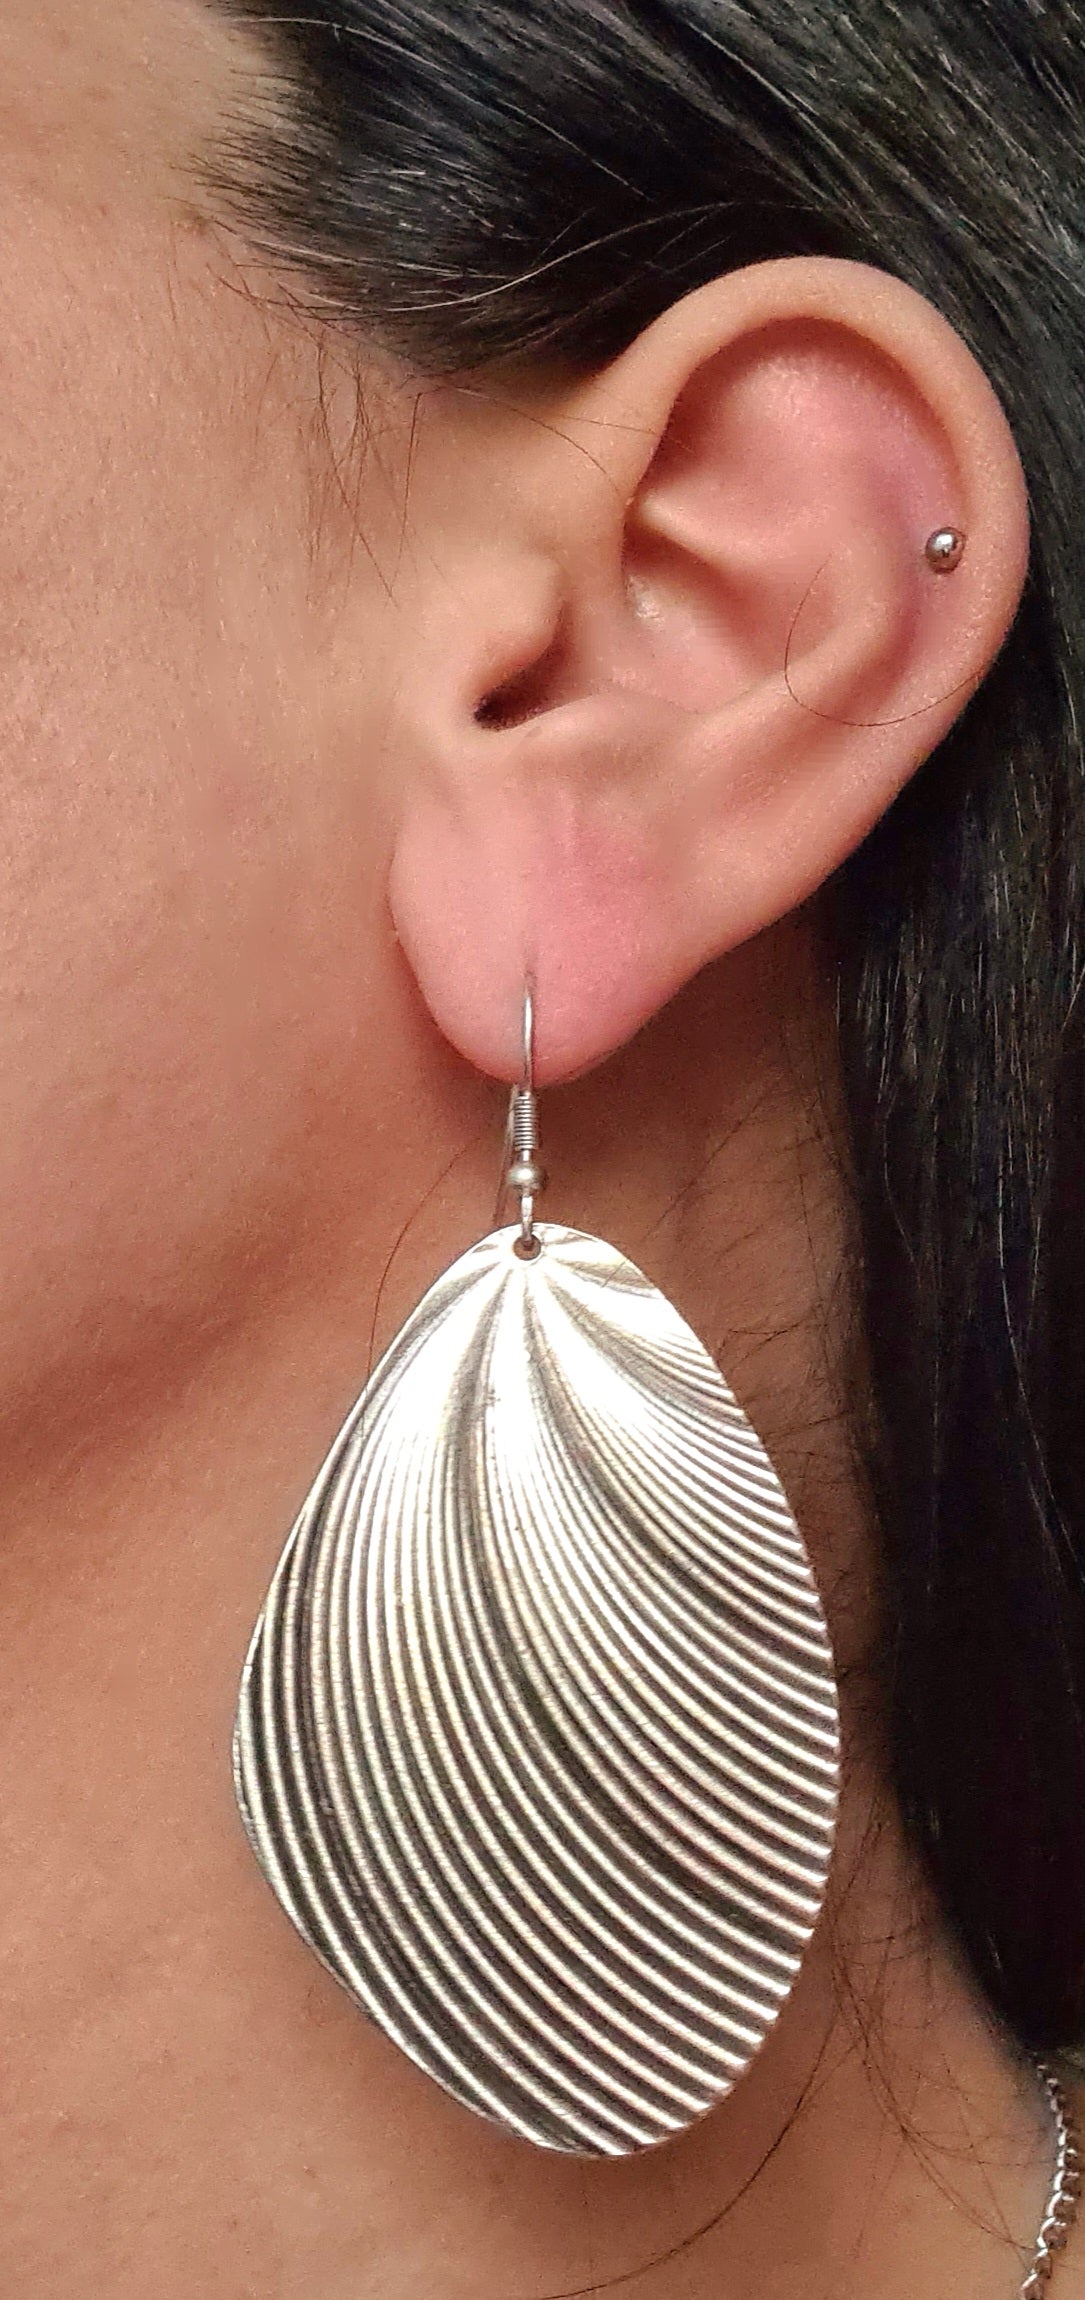 A woman wearing silver earrings. The earrings are small and delicate, and they have a oval design on them. The earrings are on the woman's ears, and they are reflecting the light.